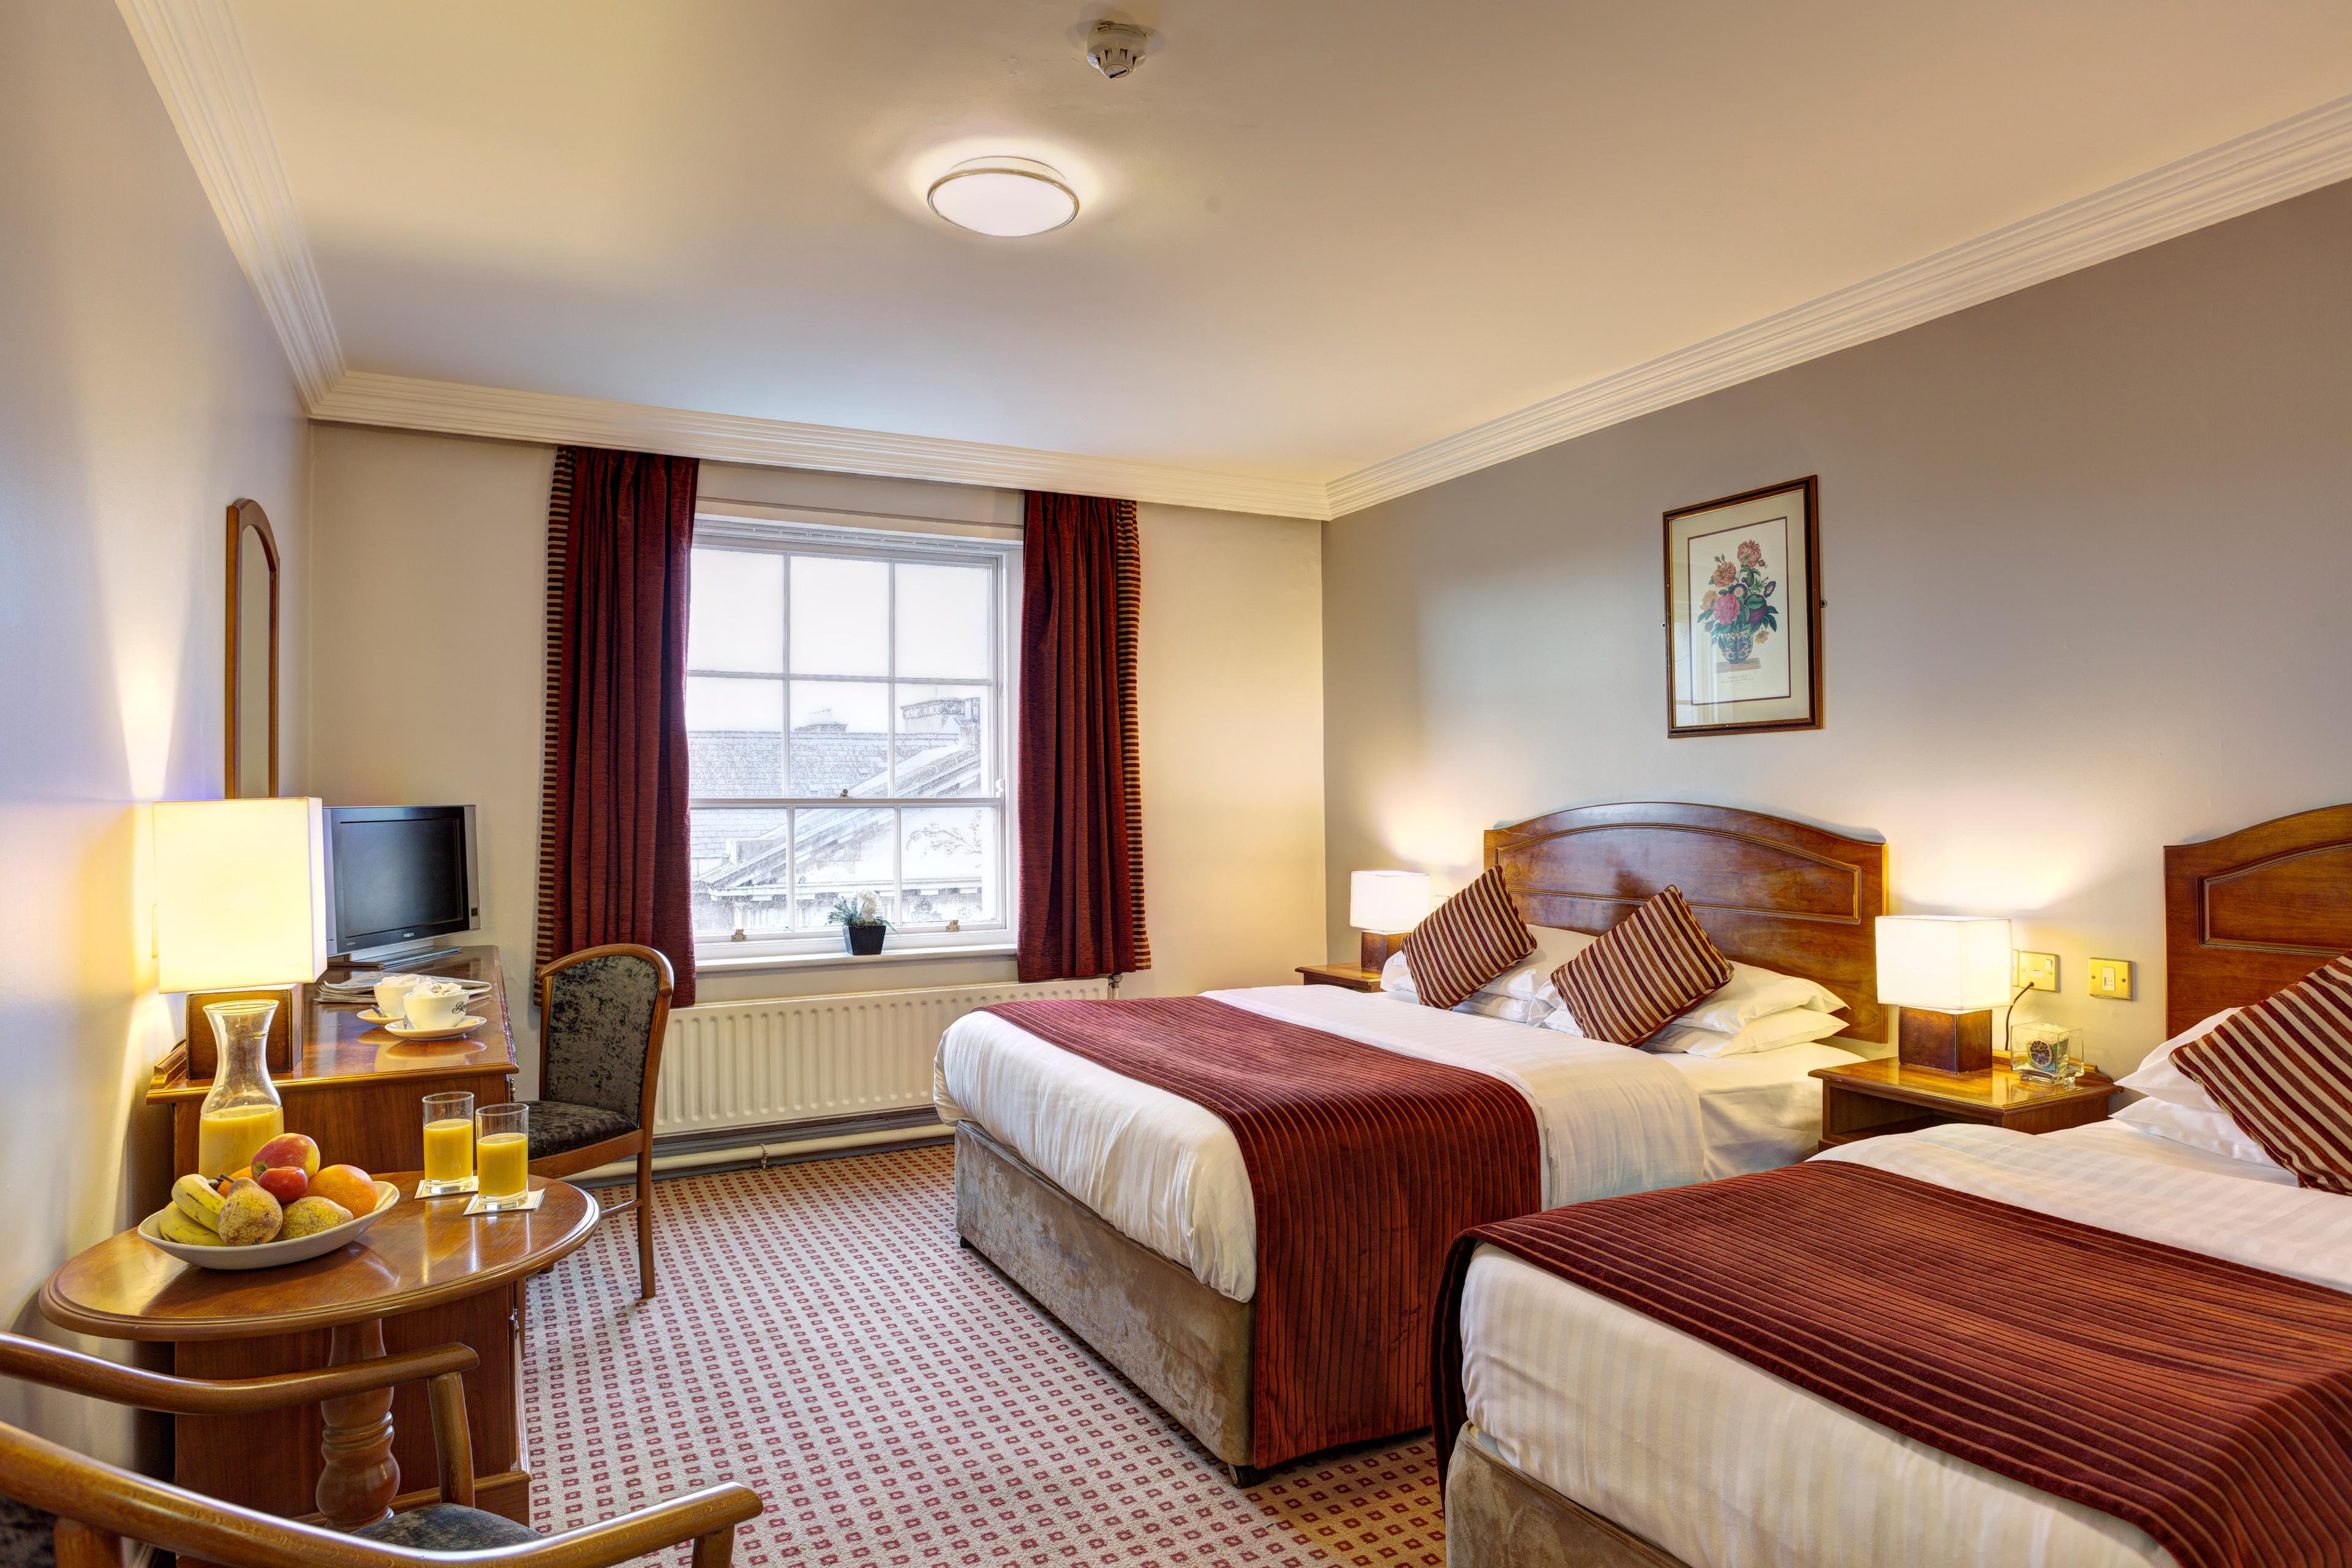 <p>Boasting accommodation for up to three, you can enjoy everything Dublin has to offer with friends, family and loved ones! When you stay in our Triple Room, overlooking Dublin's scenic downtown, you'll also have access to a host of amenities to ensure your stay is as comfortable as it is rewarding. Enjoy:</p><ul><li>Multi-channel flat-screen televisions</li><li>Complimentary in-room coffee and tea</li><li>Free Wi-Fi</li><li>In-room laptop safe</li><li>Electronic key-card access</li><li>Bathroom amenities</li></ul>